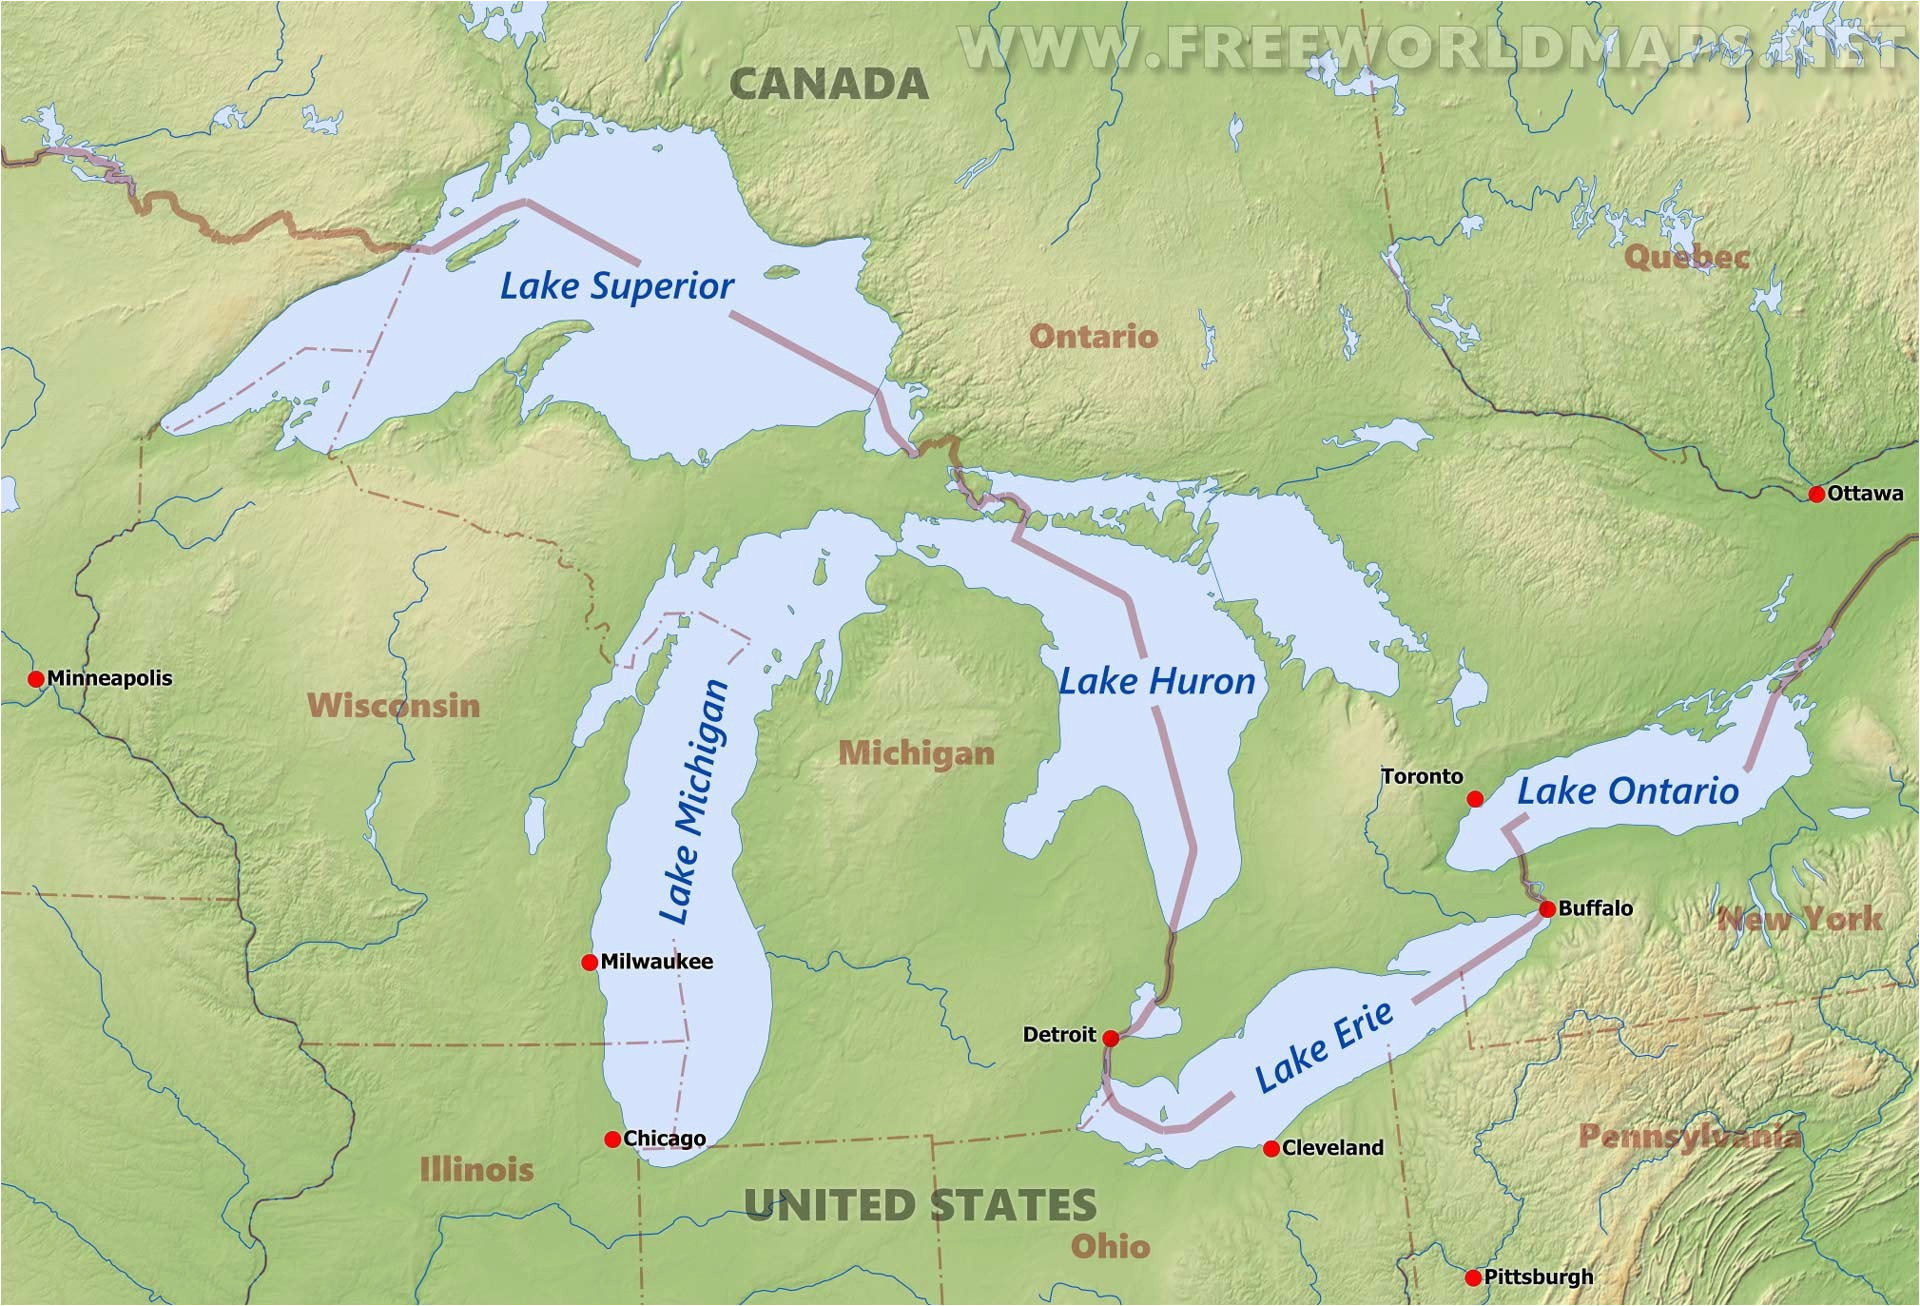 Ohio And Erie Canal Map Ohio And Erie Canal Map Of Us Outlinemap4 Beautiful Erie Canal Great Of Ohio And Erie Canal Map 1 